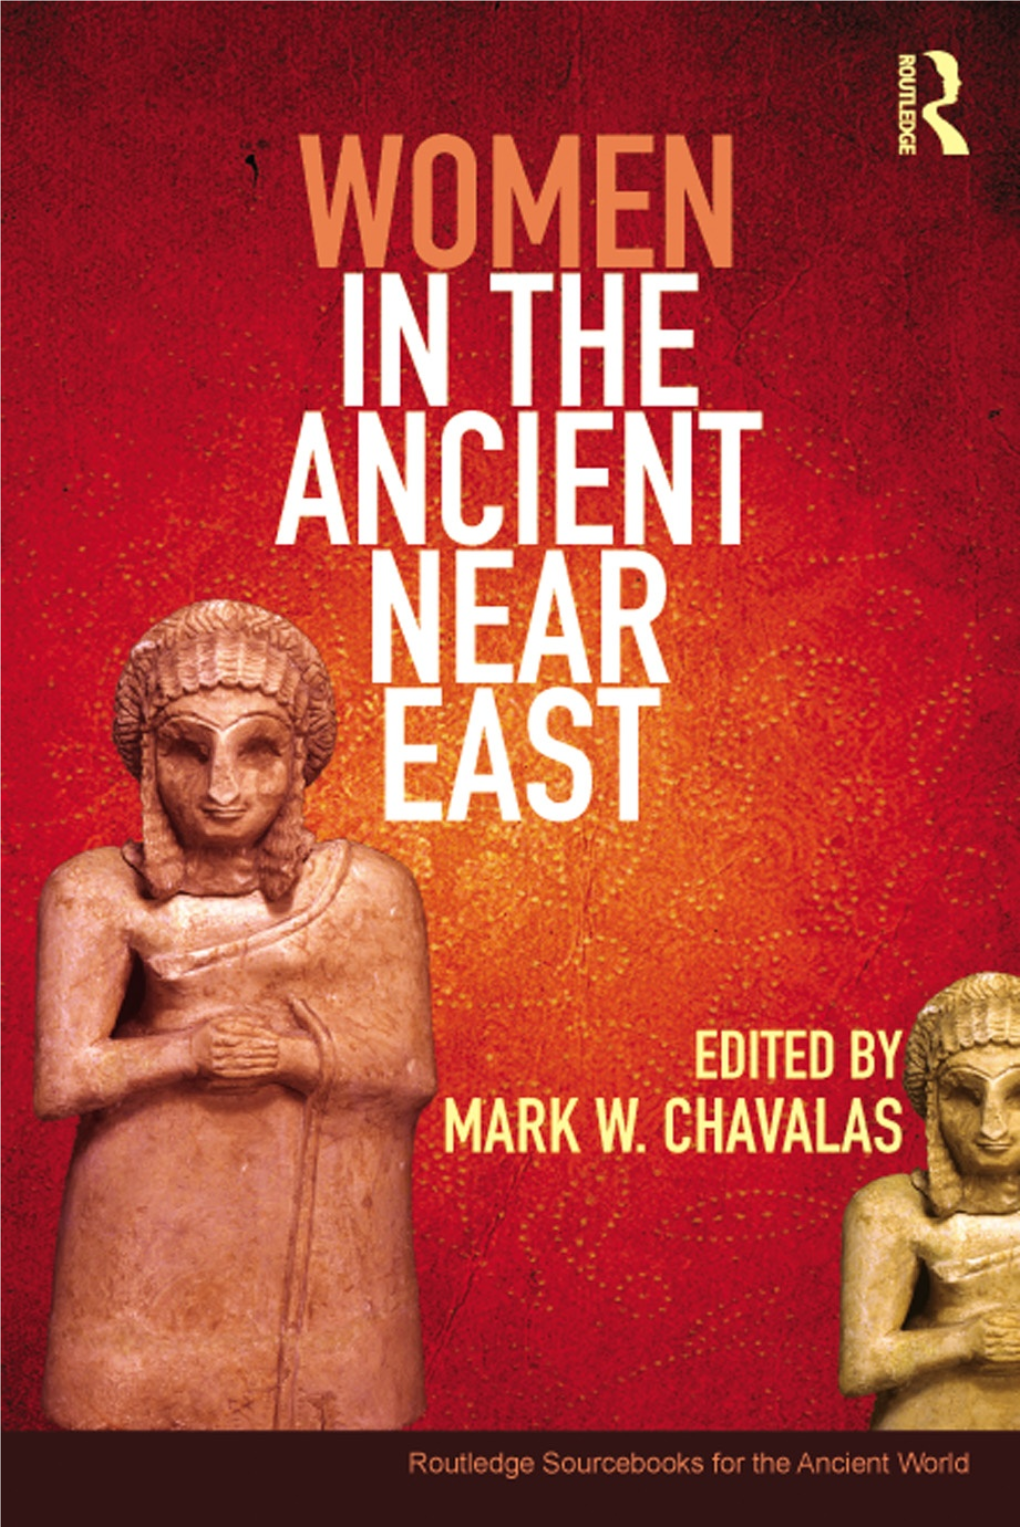 Women in the Ancient Near East: a Sourcebook